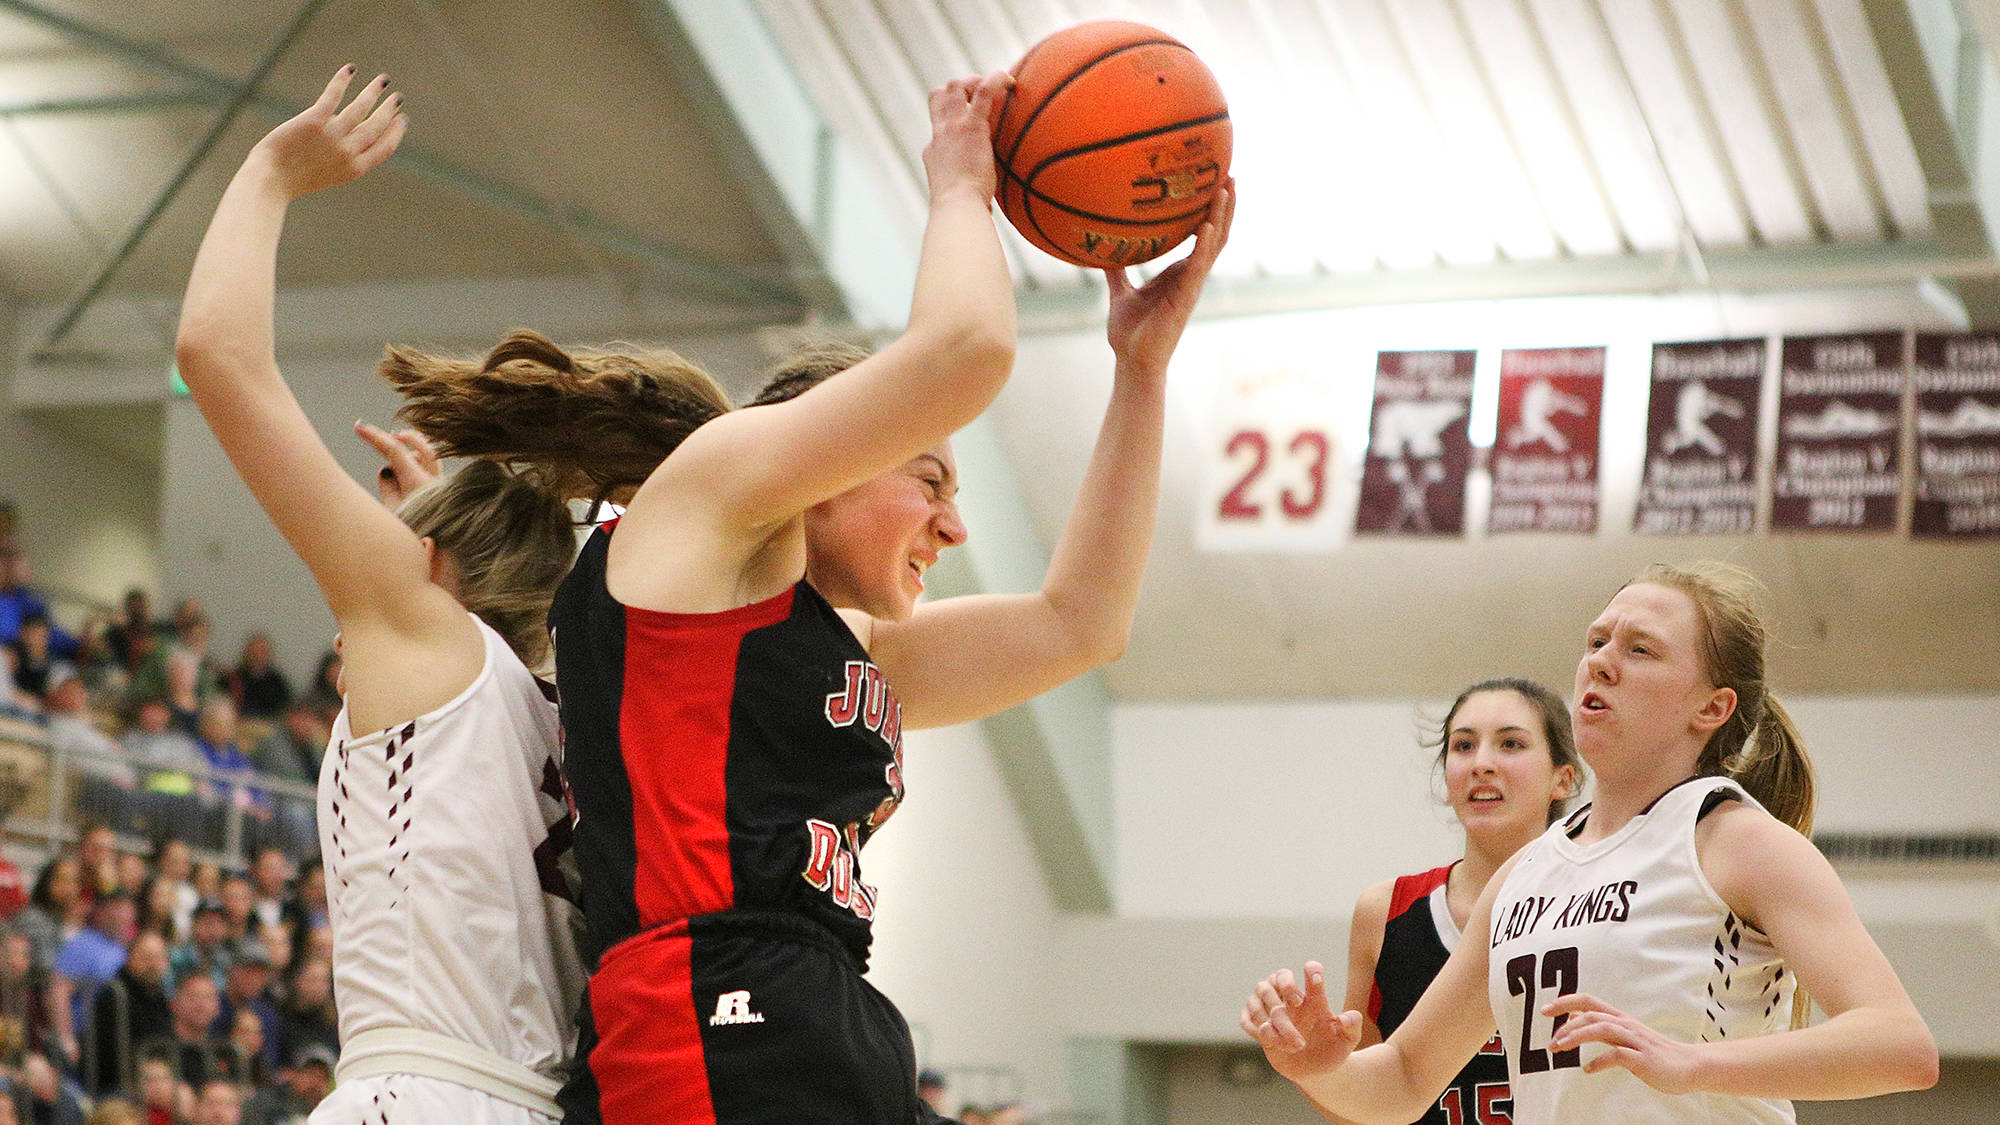 Juneau-Douglas’ Cassie Dzinich runs back-to-back with Ketchikan’s Emmie Smith as Ketchikan’s Hannah Maxwell, right, looks on Friday during the Region V 4A championship game. Ketchikan won 52-44. (Dustin Safranek | Ketchikan Daily News)